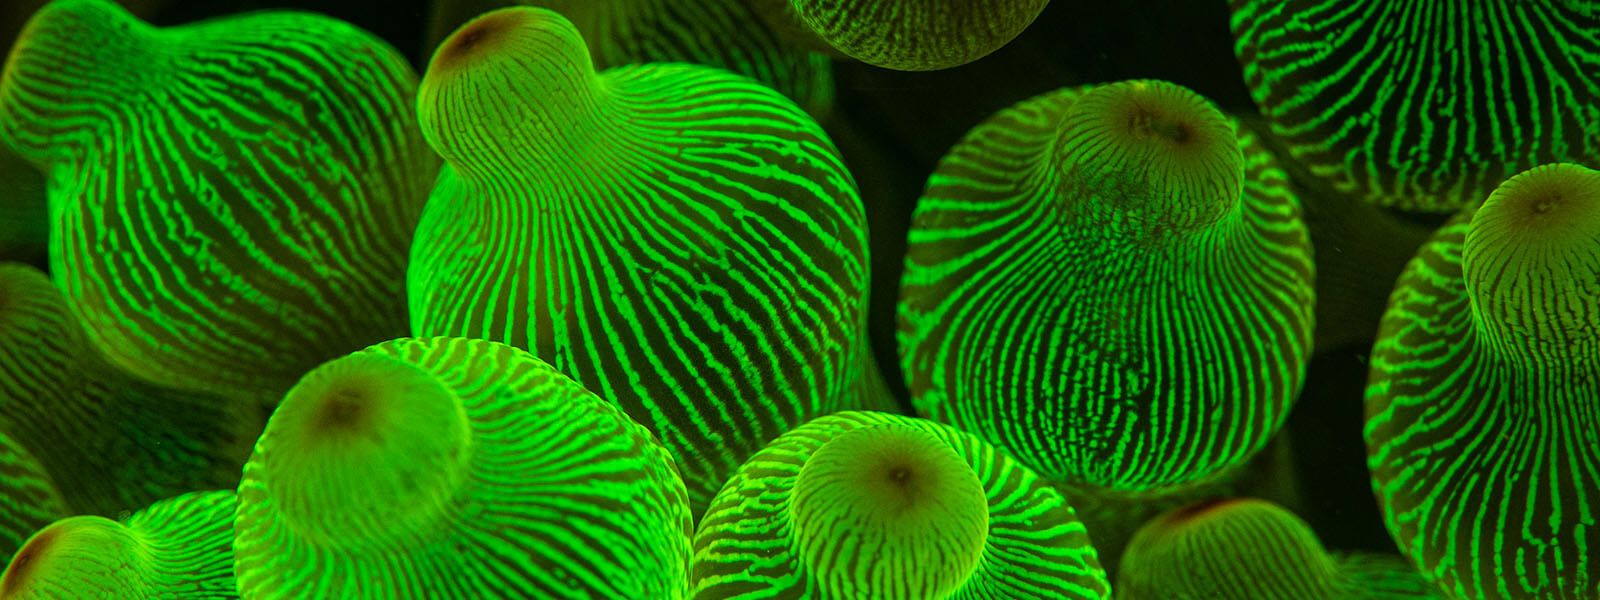 We see corals and anemones fluoresce on our night snorkels